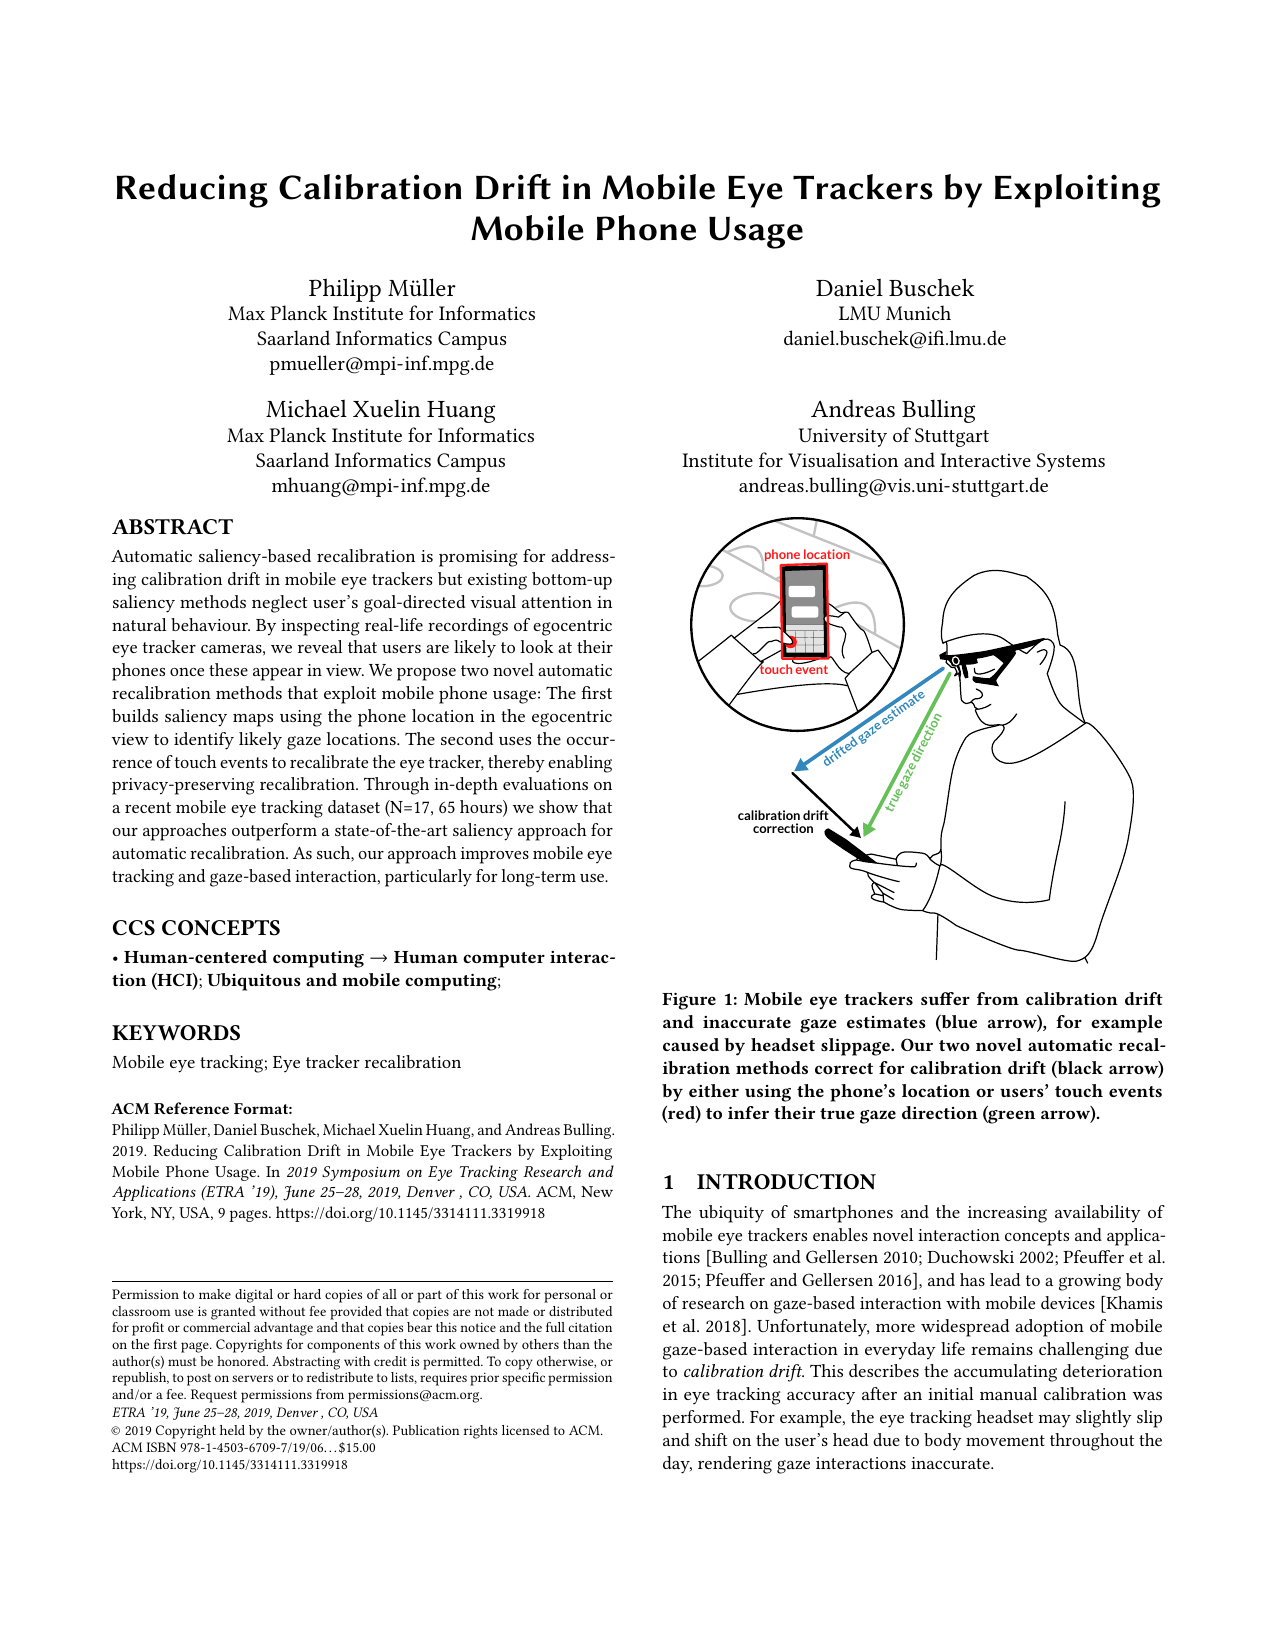 Reducing Calibration Drift in Mobile Eye Trackers by Exploiting Mobile Phone Usage